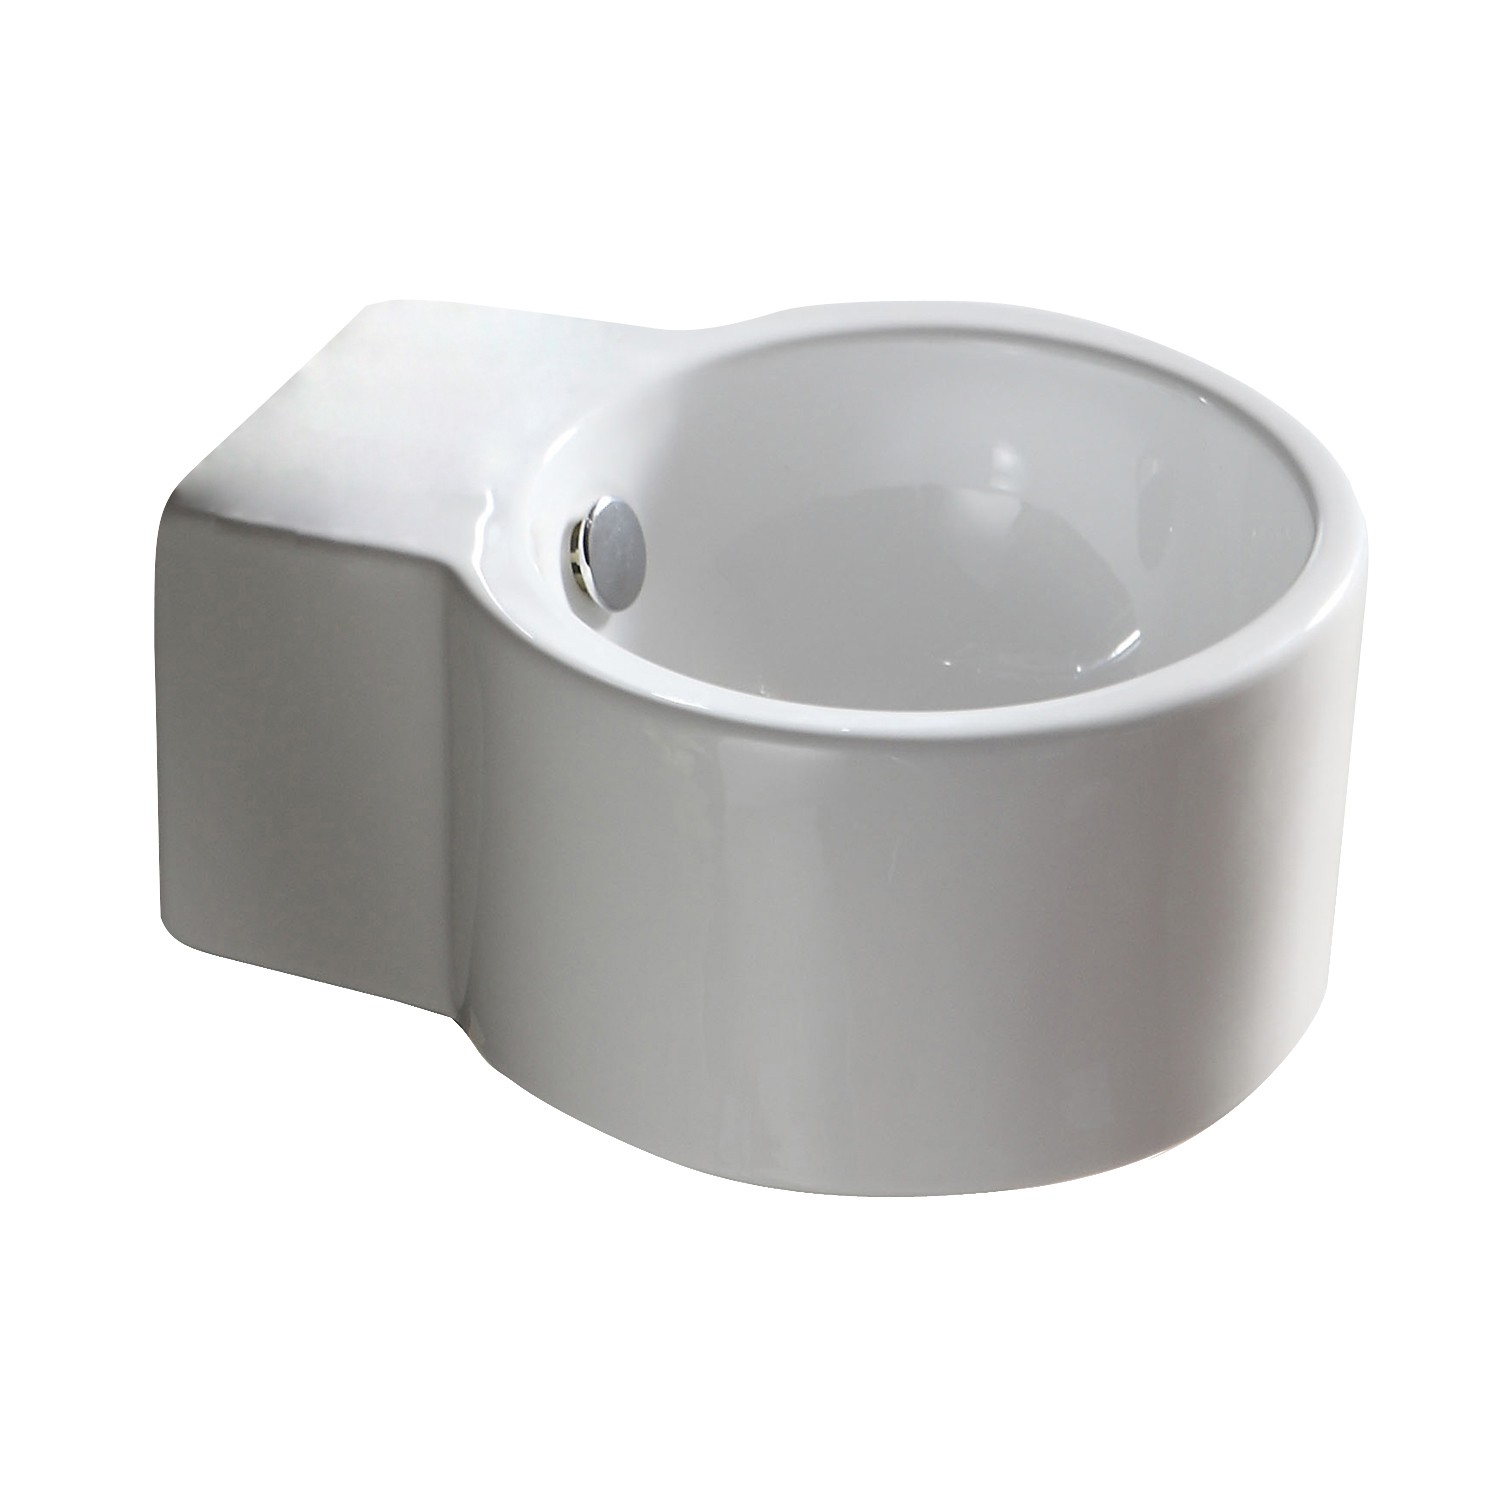 BARCLAY 4-8140WH CALLA 10 7/8 INCH SINGLE BASIN ABOVE COUNTER OR WALL MOUNT BATHROOM SINK - WHITE